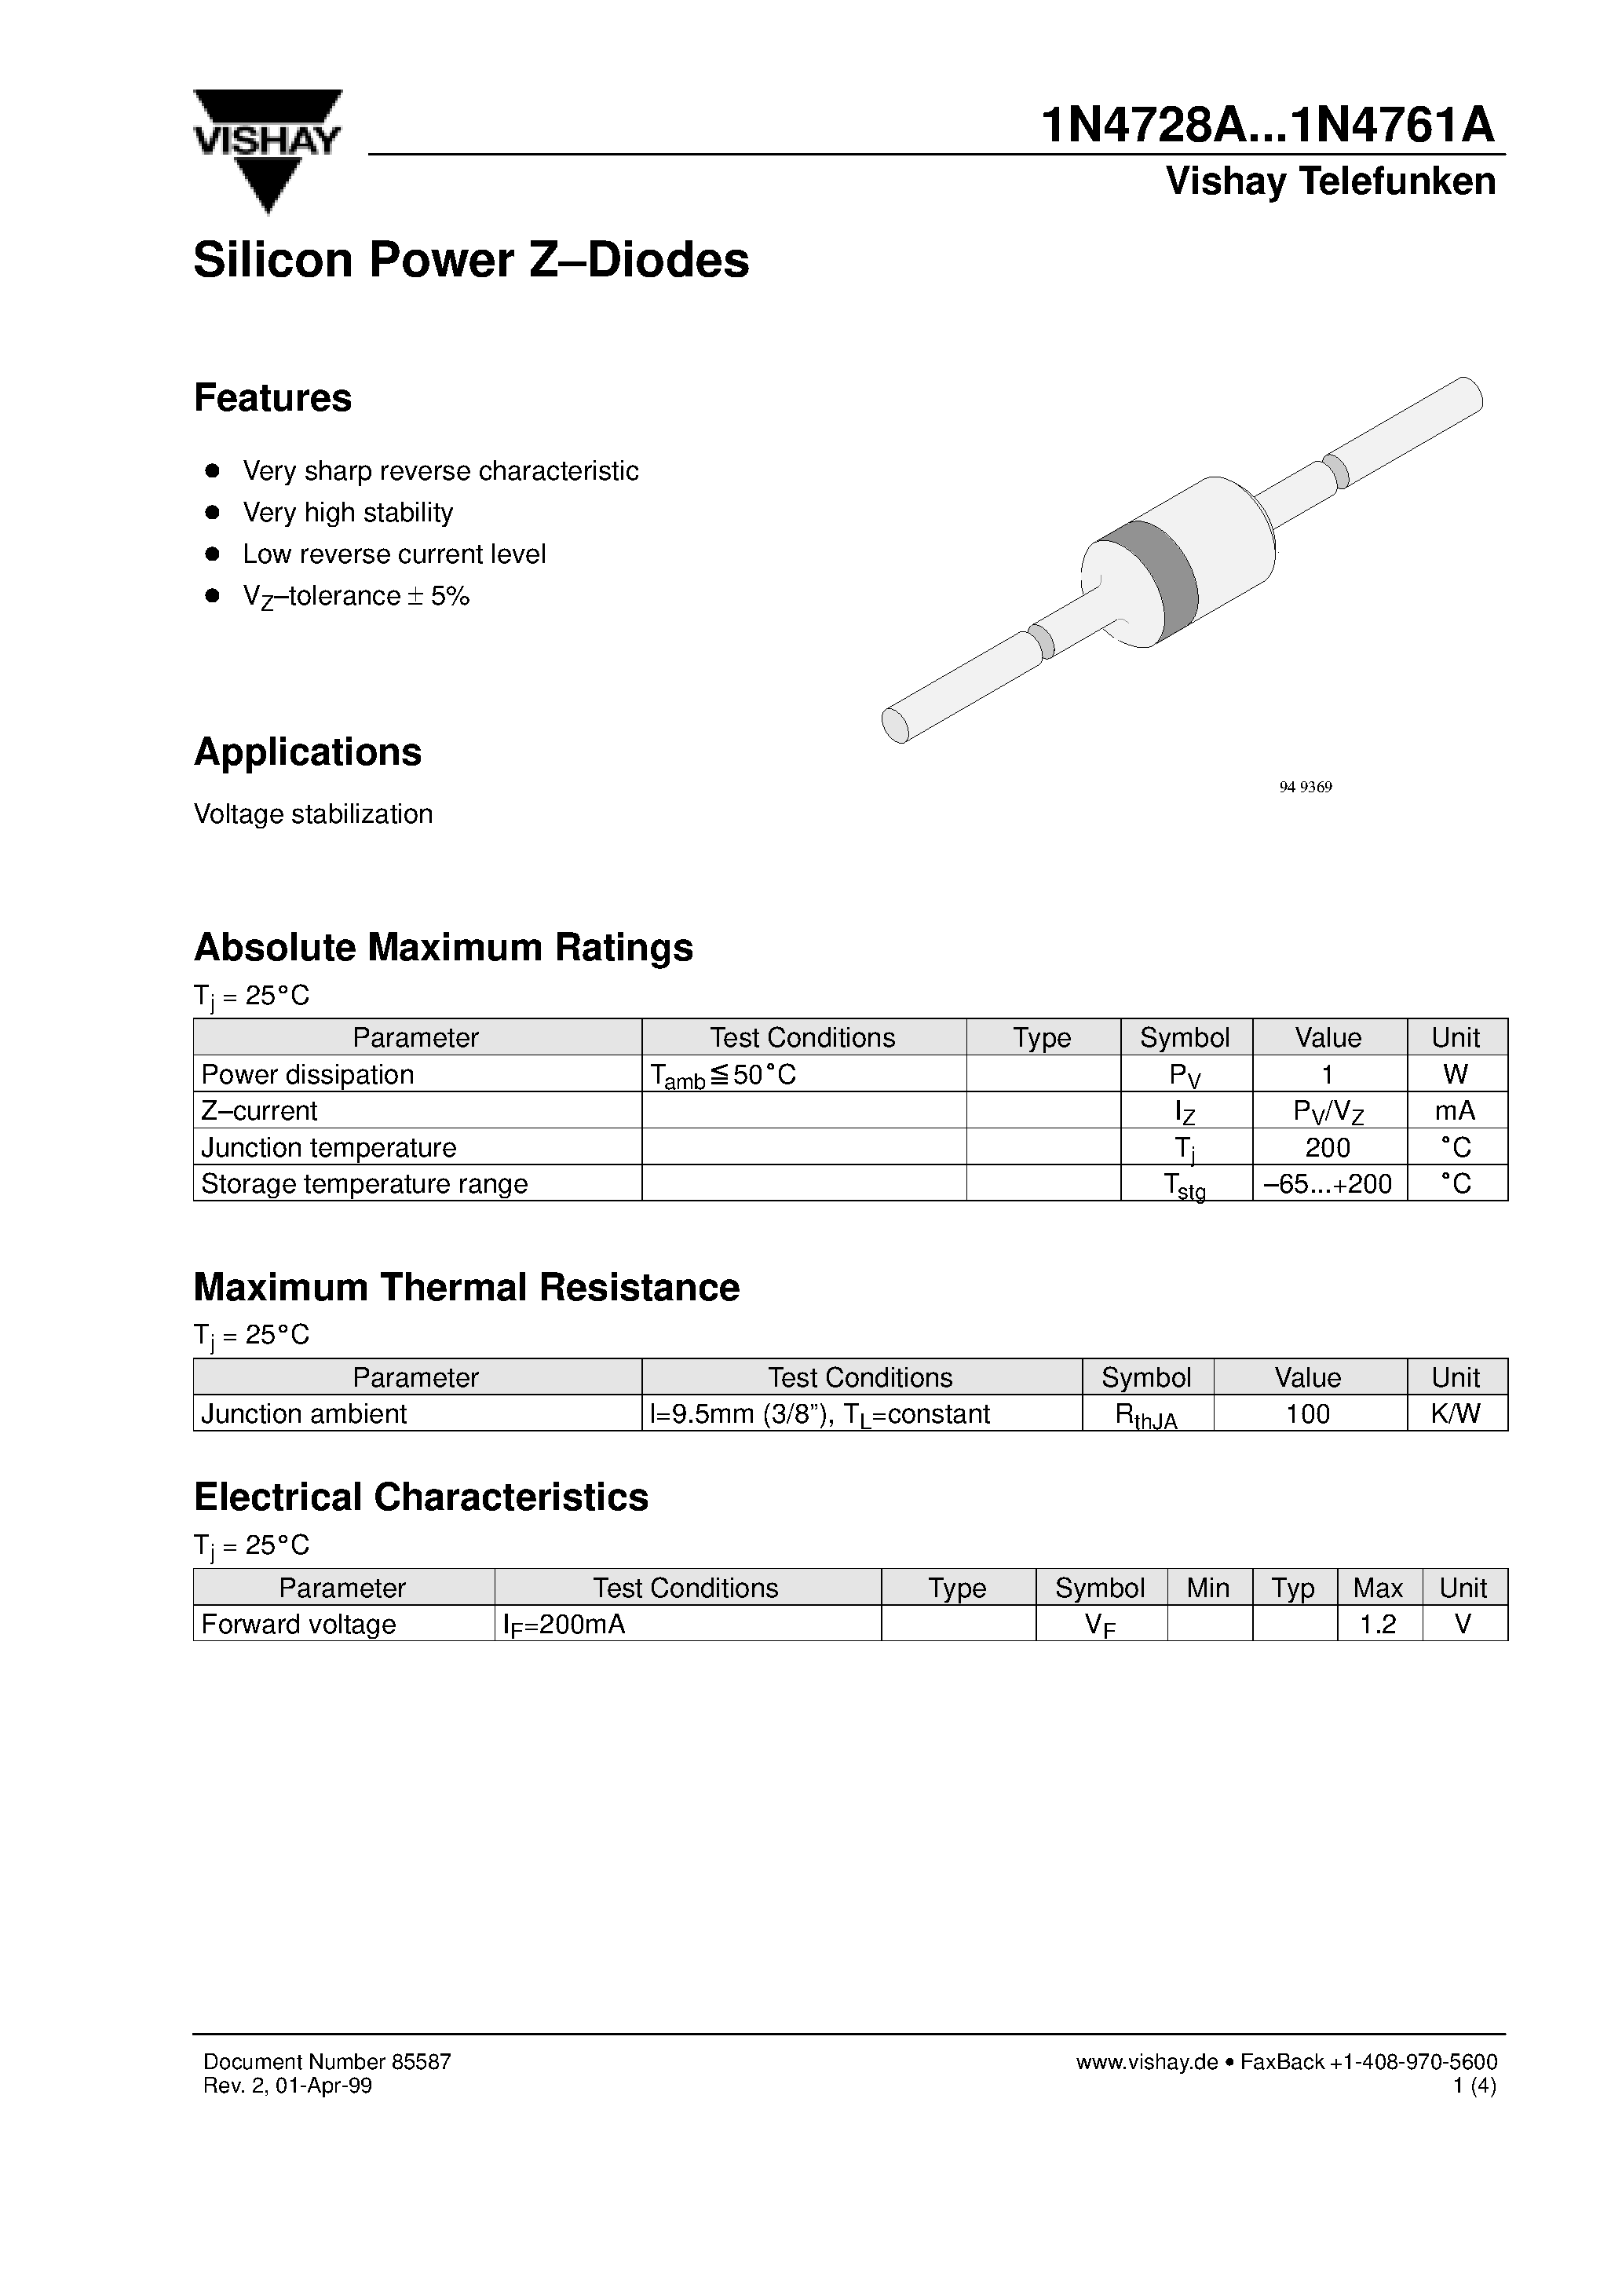 Даташит 1N4746A - Silicon Power Z-Diodes страница 1